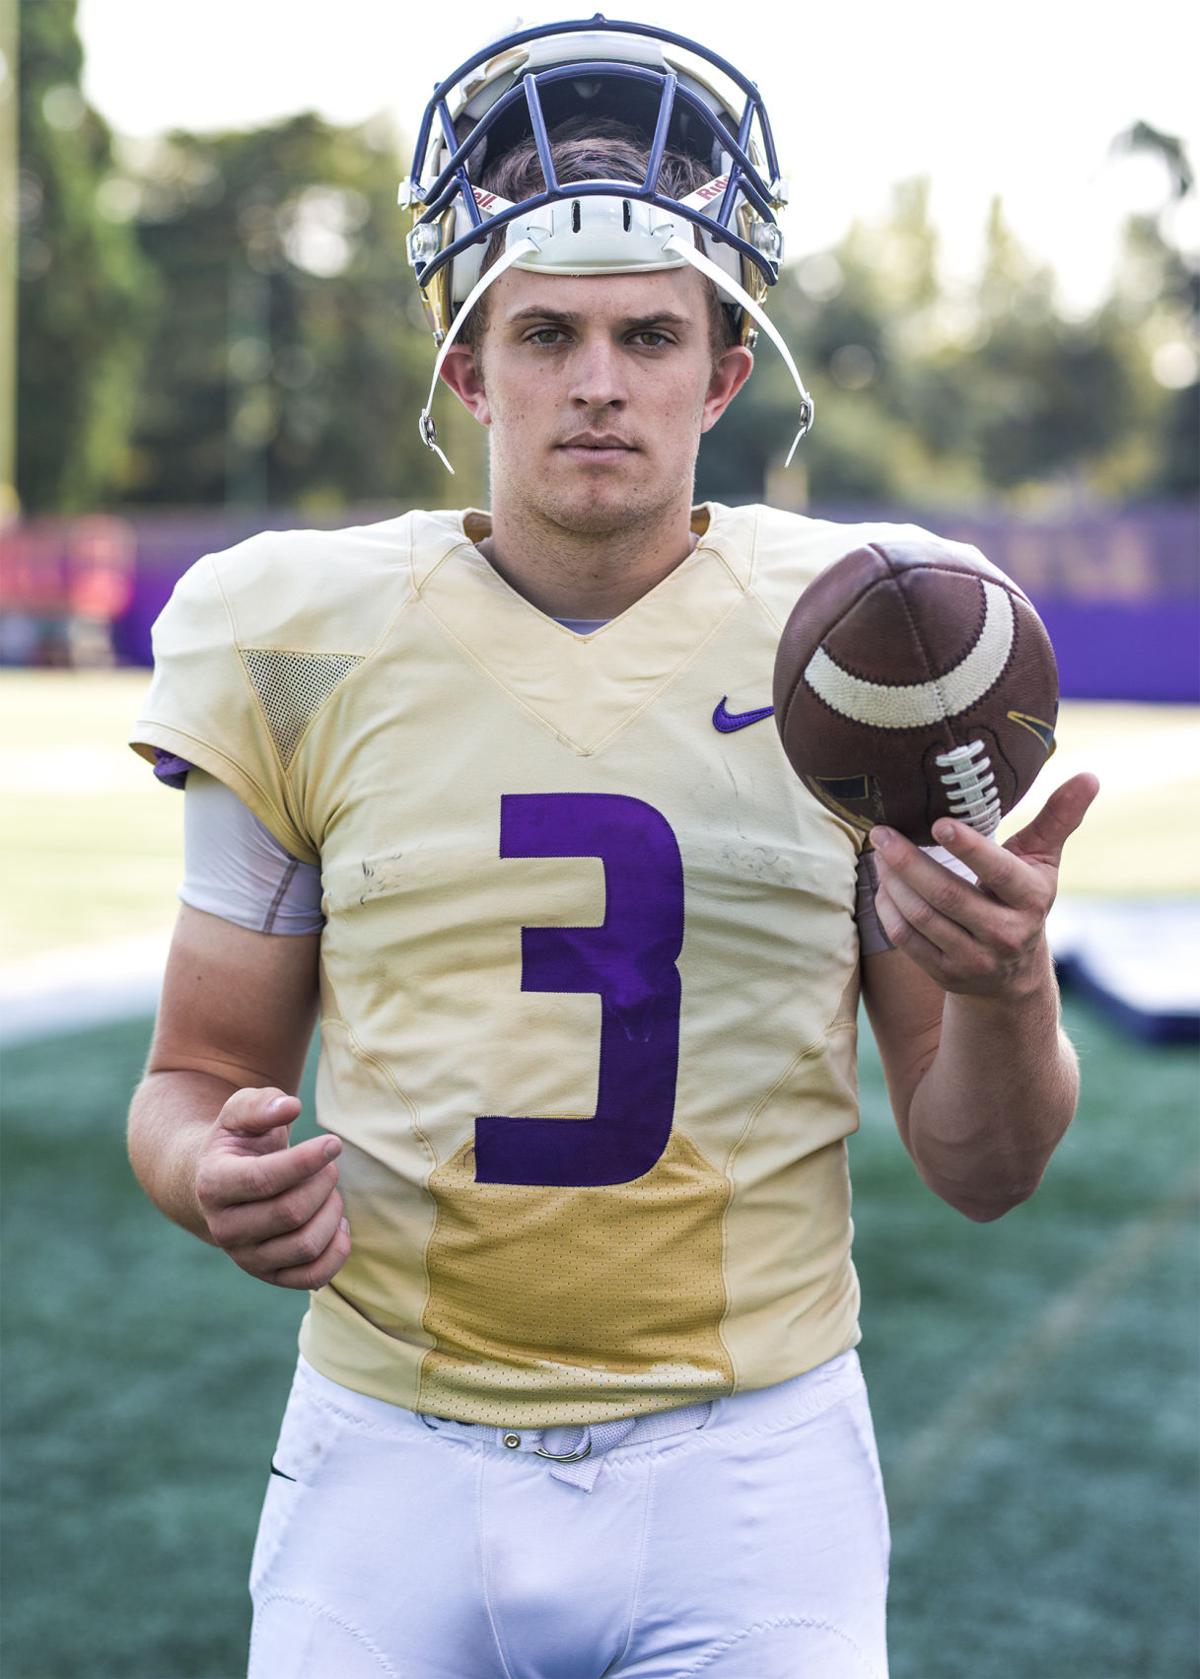 Same old, same old for Jake Browning and the Huskies Local Sports